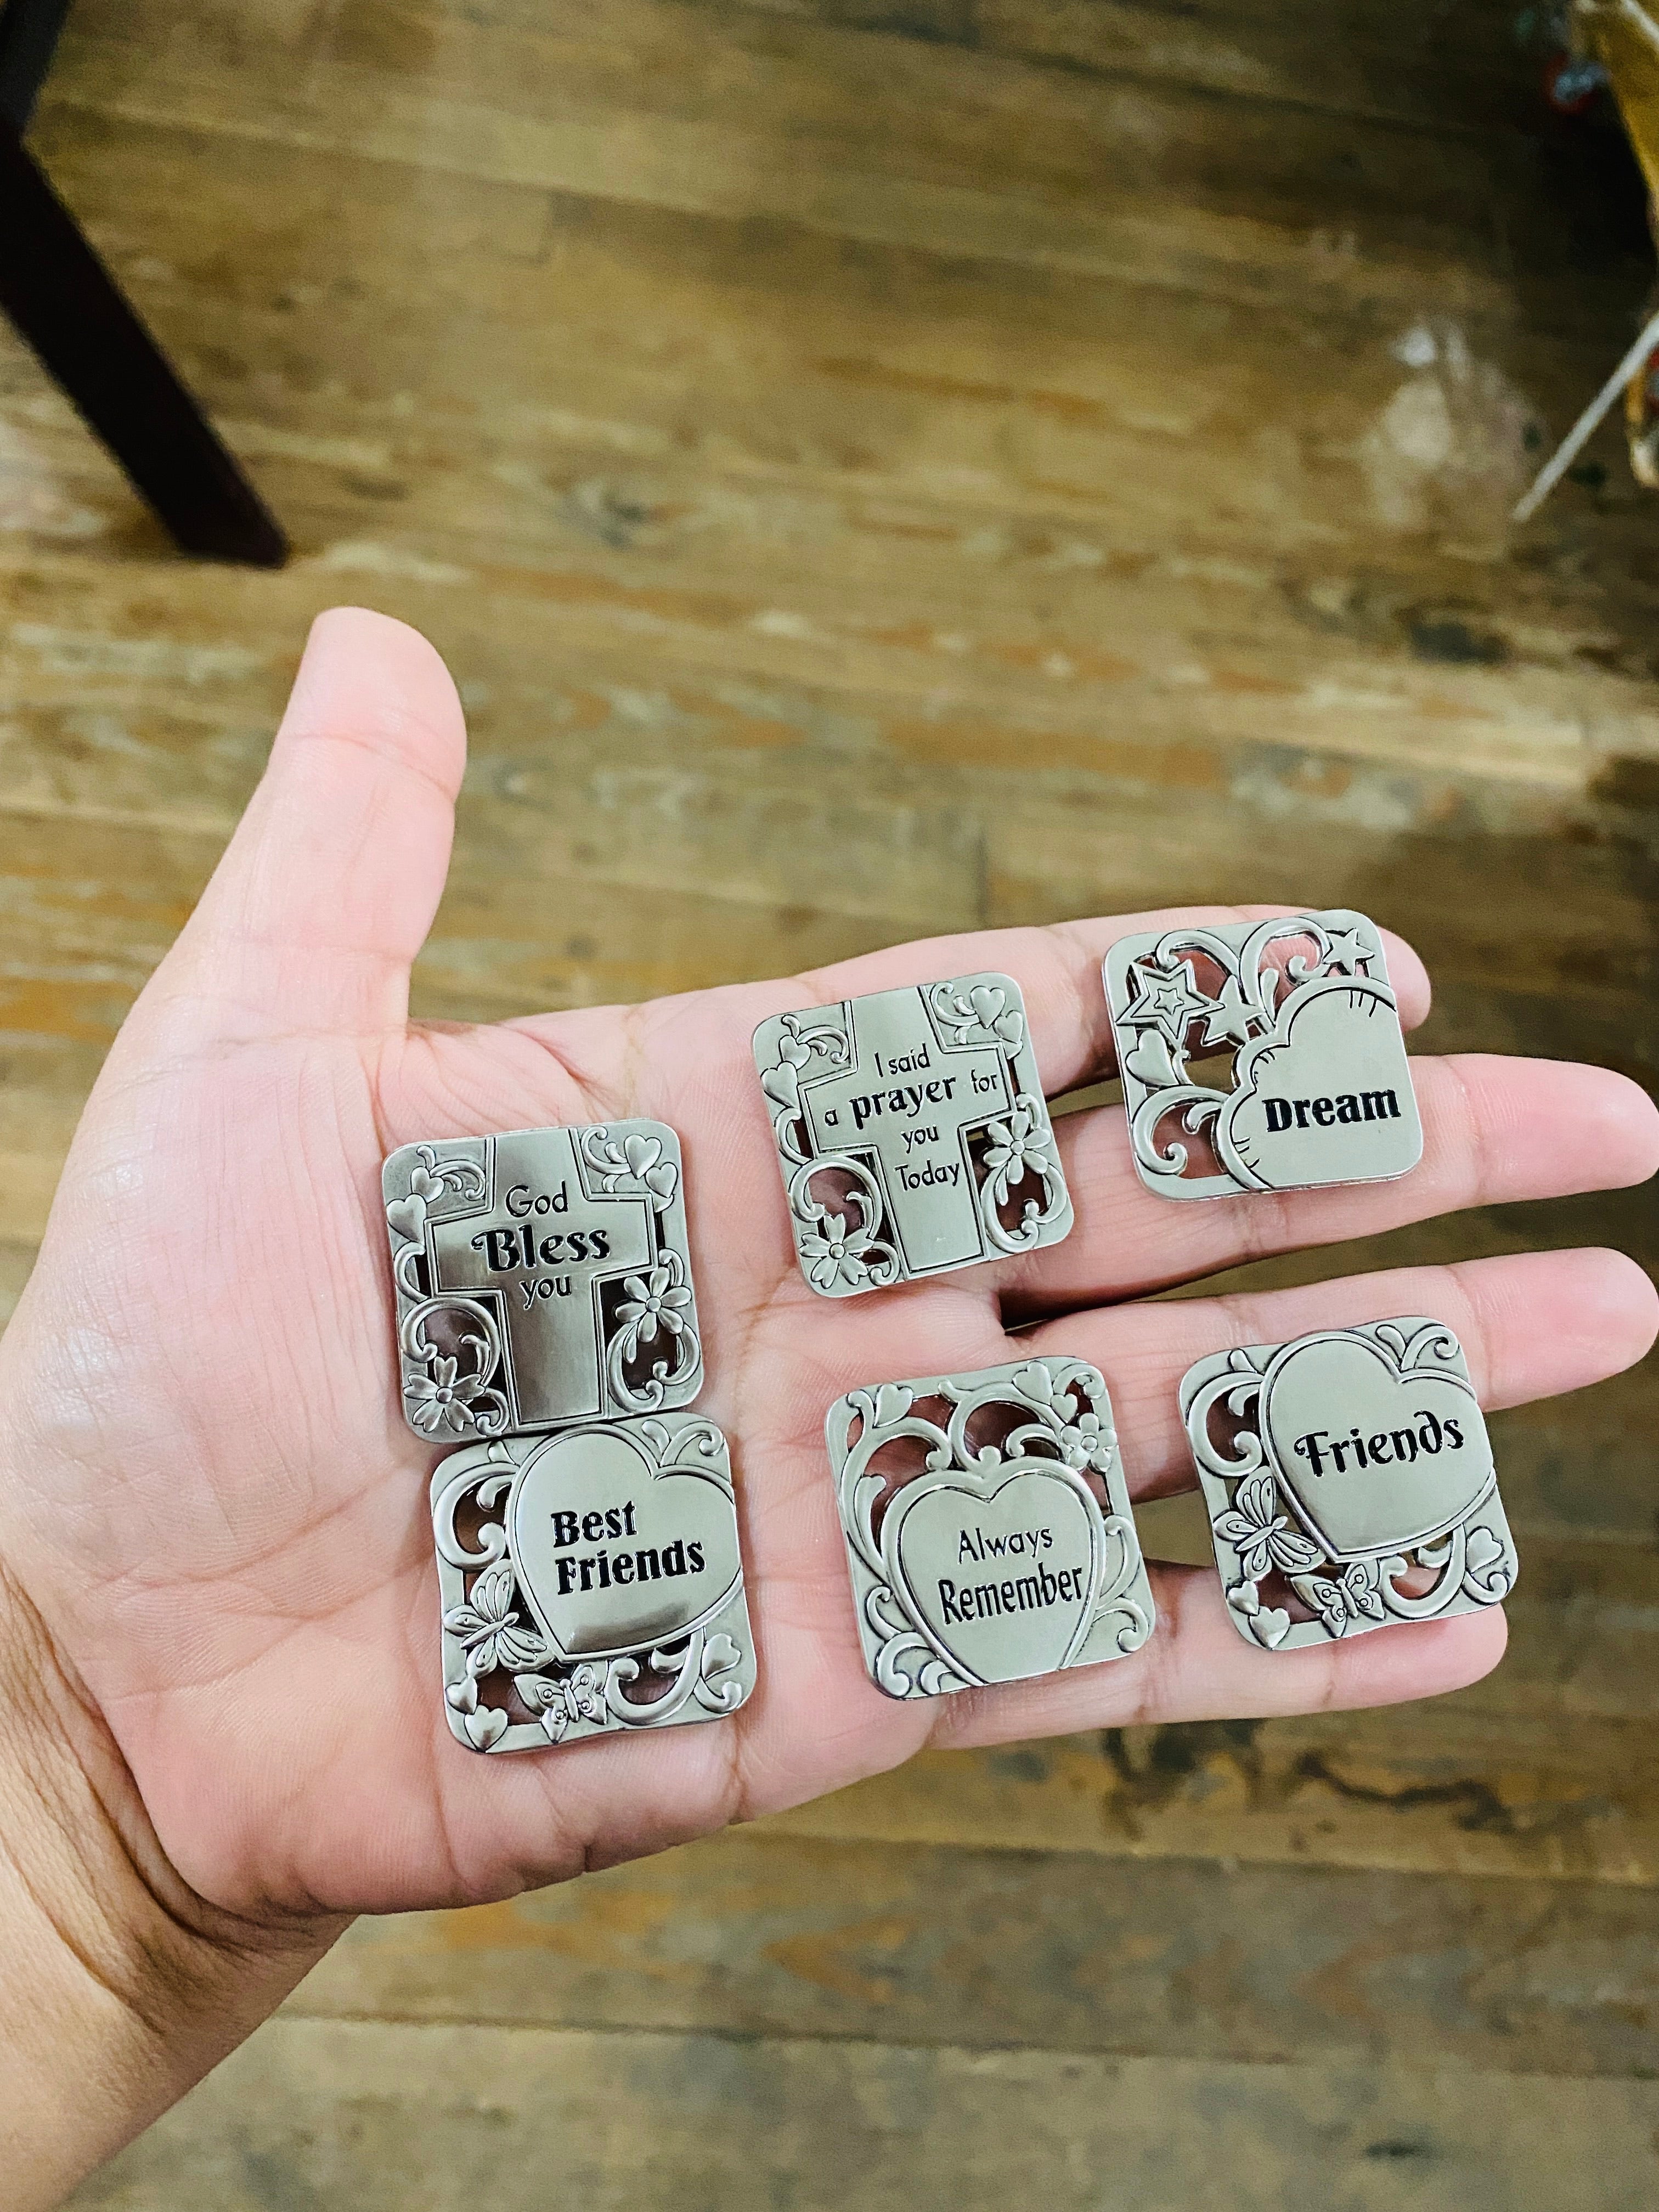 Special Message Tokens Pocket Charms